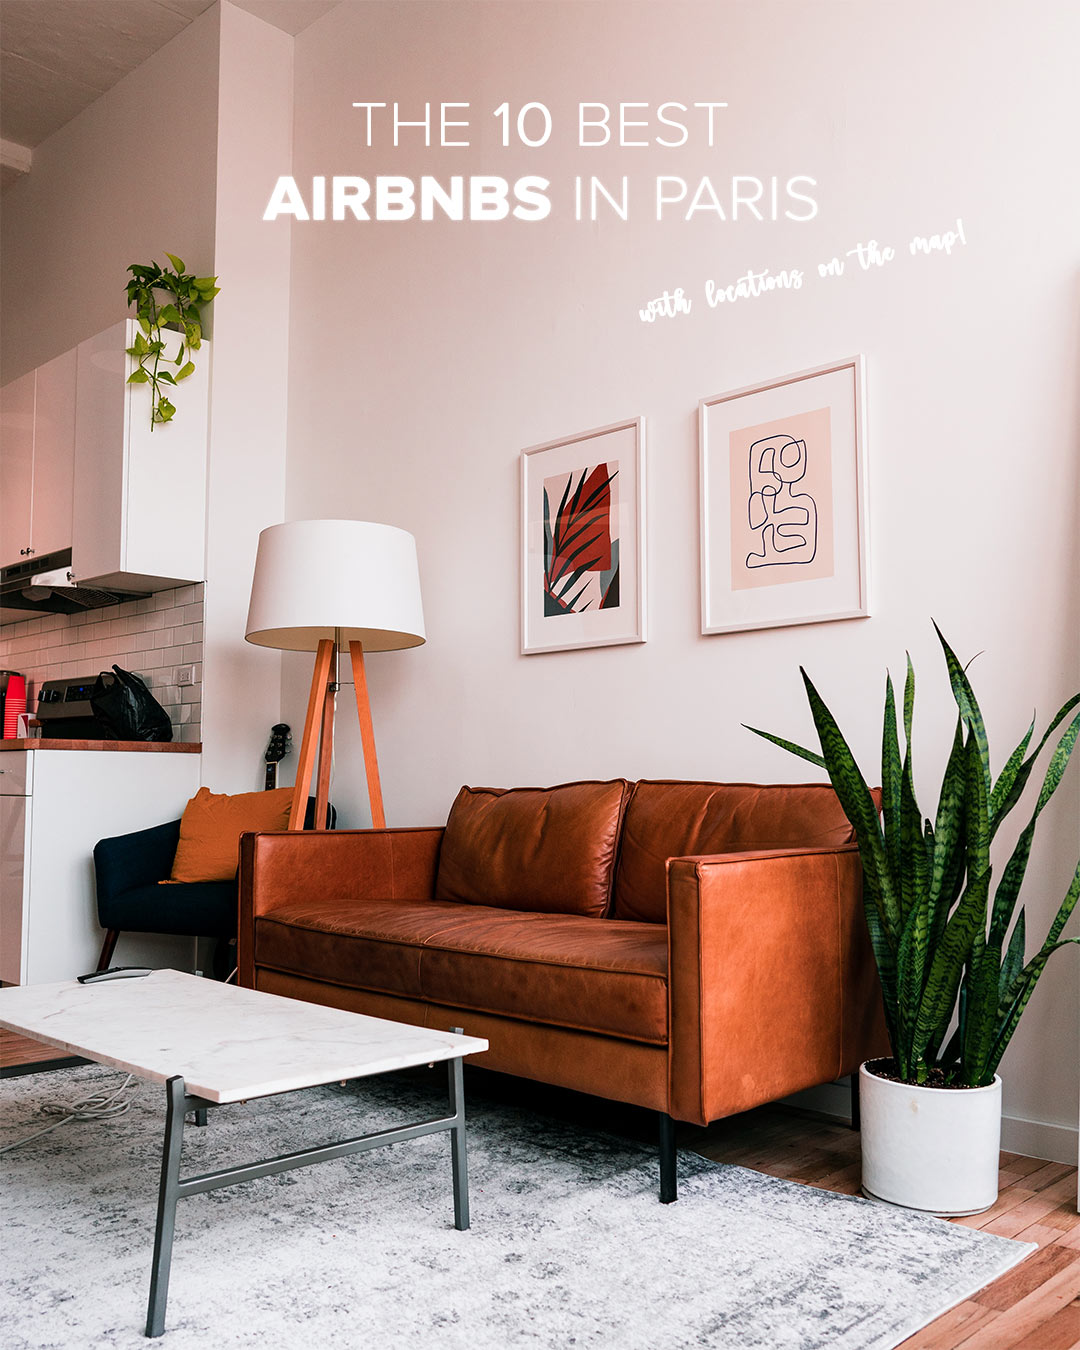 The 10 Best Airbnbs in Paris With Locations On The Map